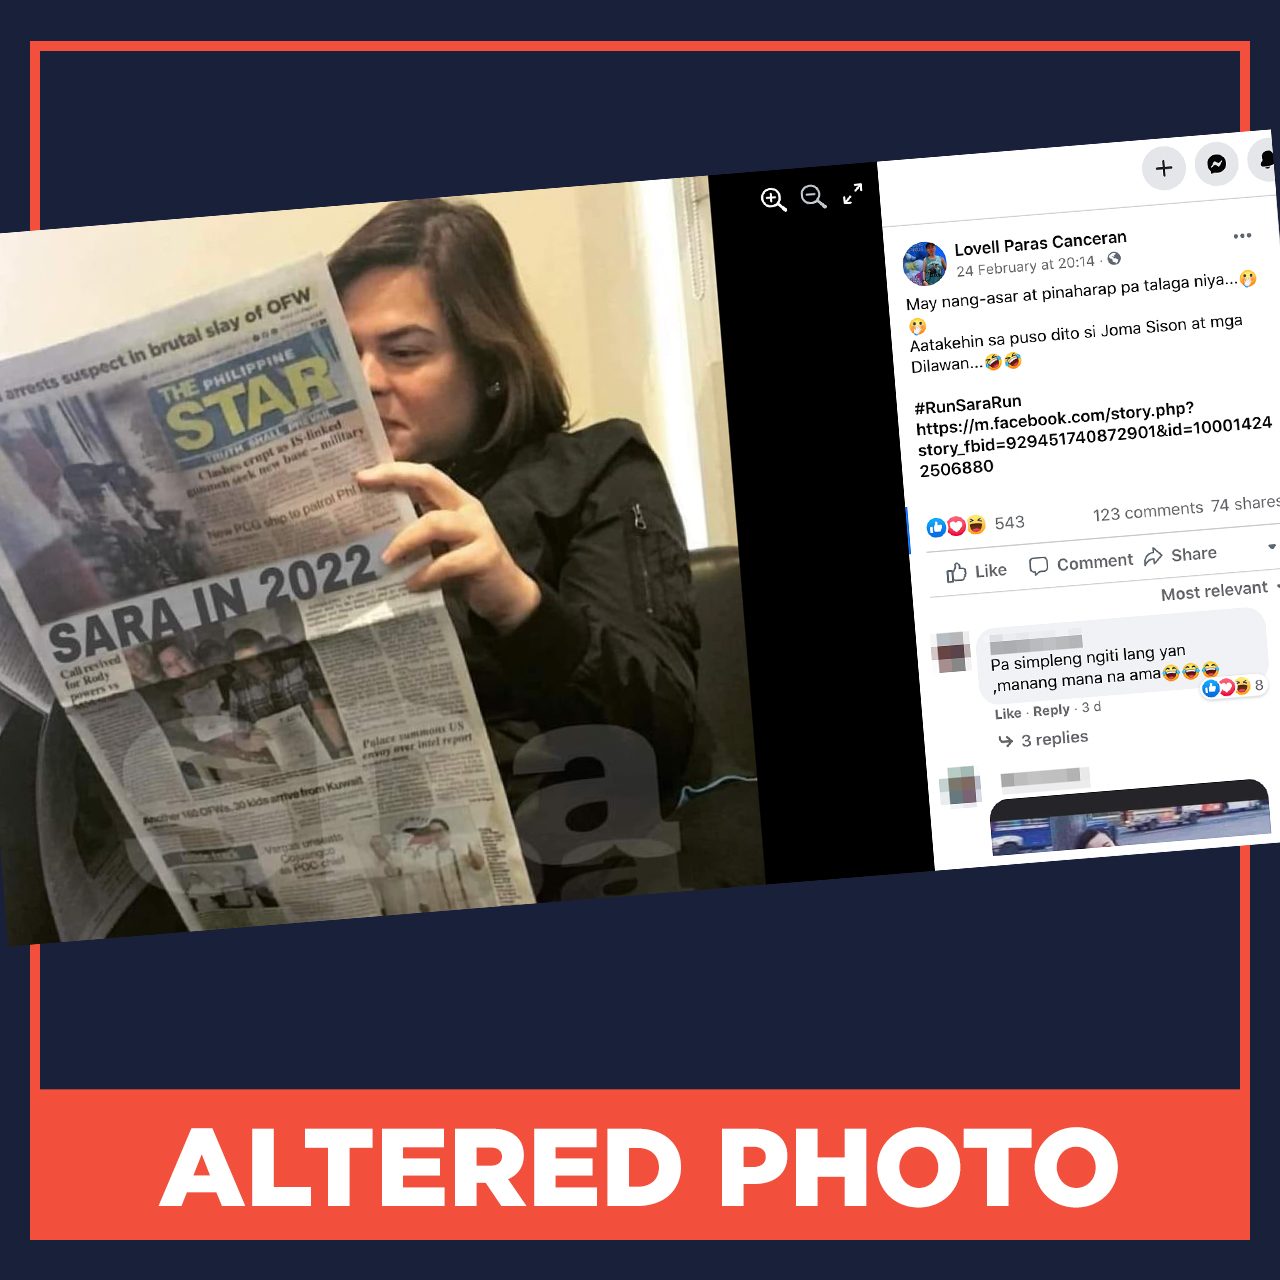 ALTERED PHOTO: ‘Philippine Star’ announces Sara Duterte’s candidacy for 2022 elections